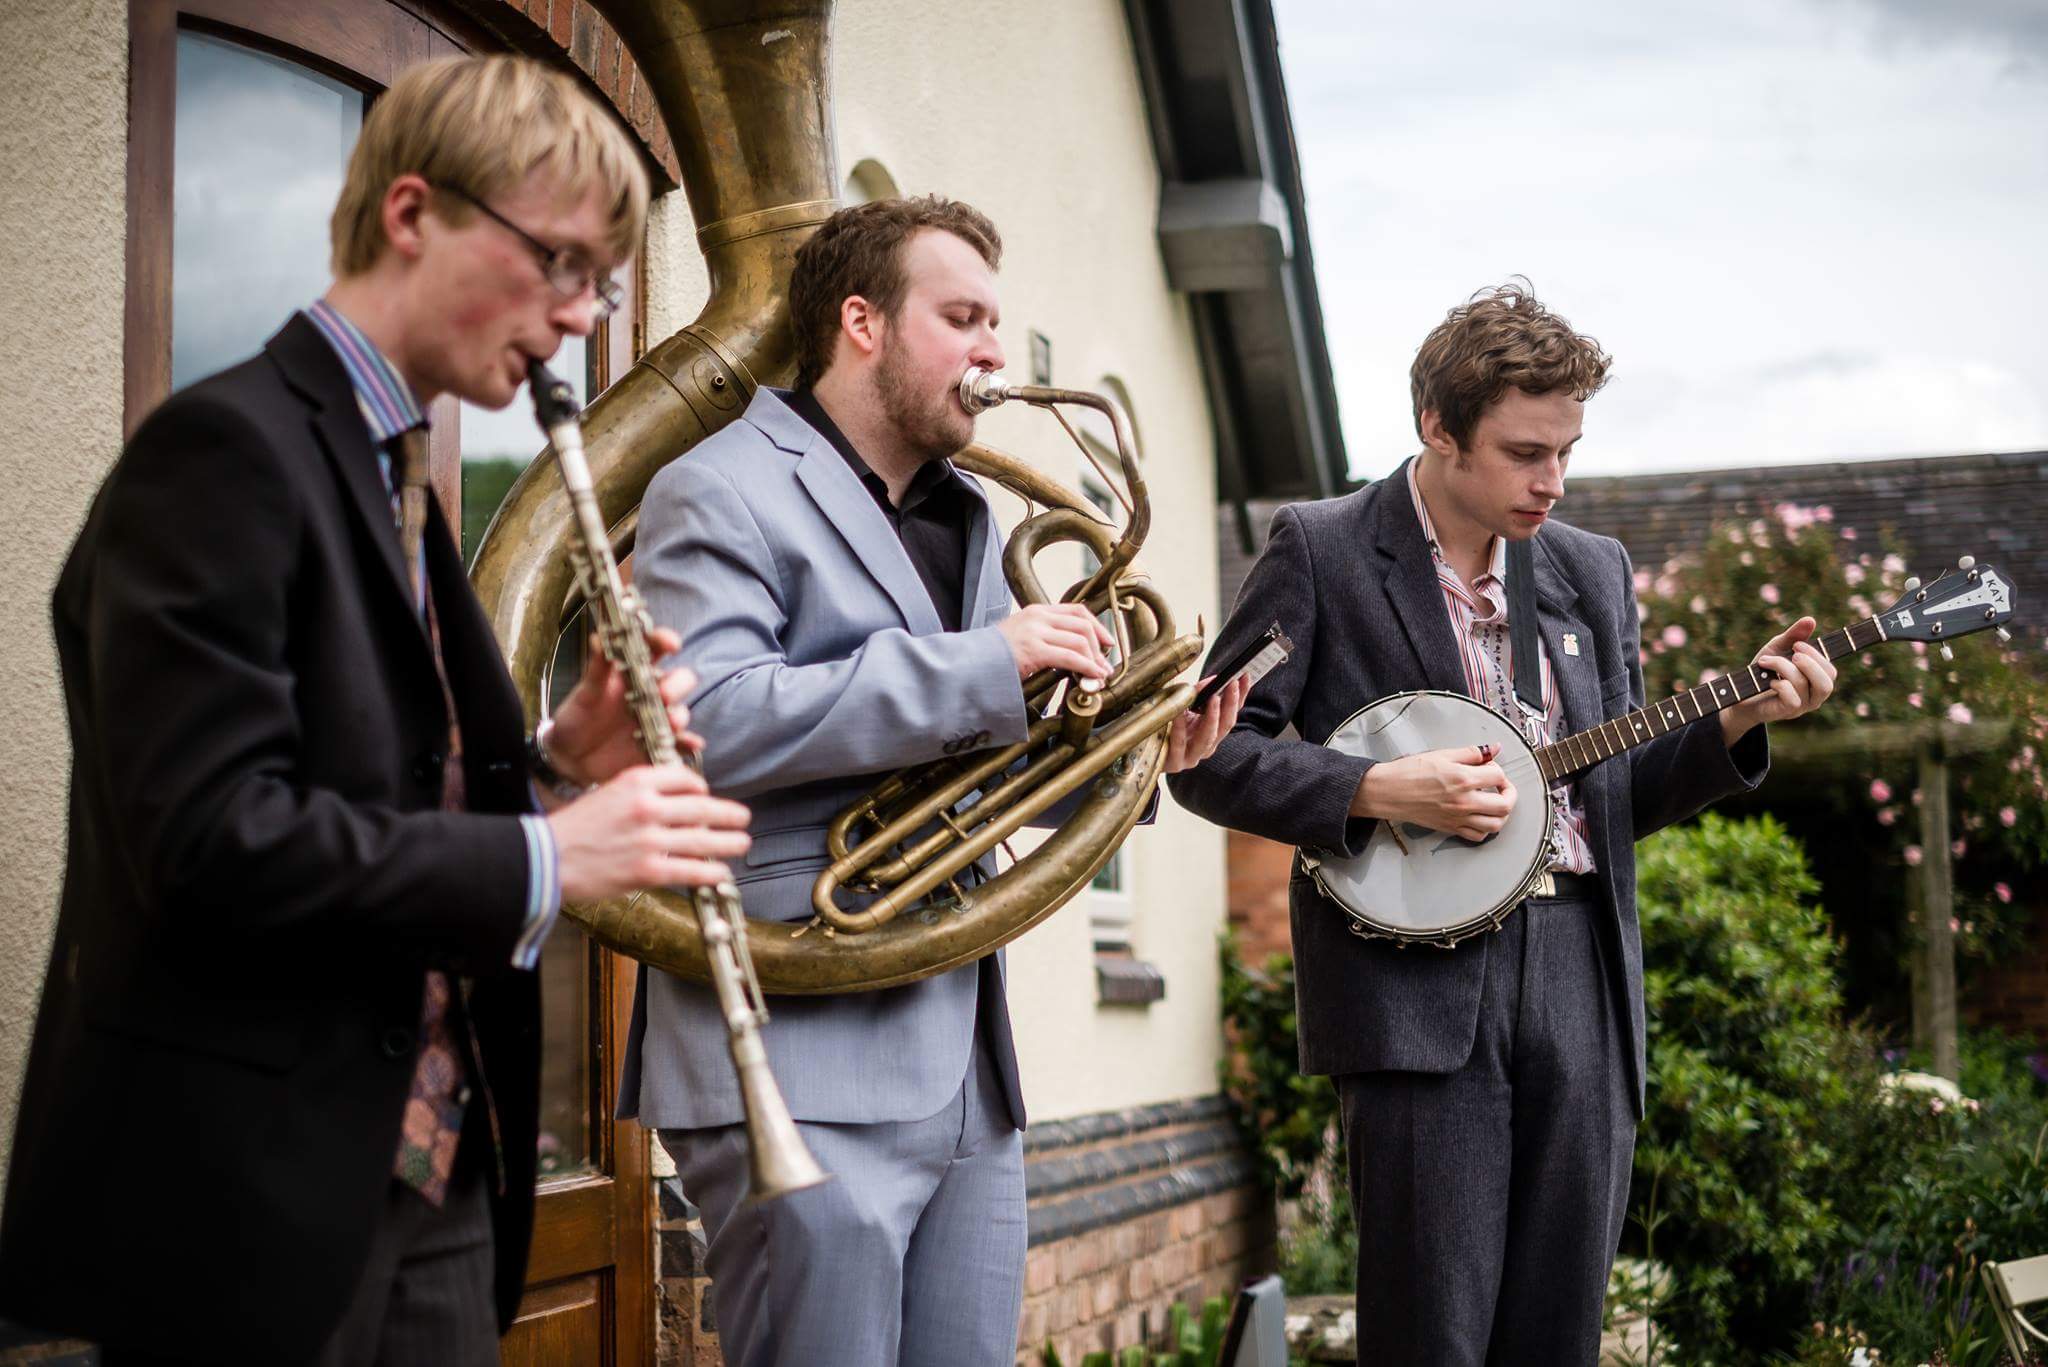 The Jelly Roll Jazz Band performing at a wedding reception in Stafford, July 2017 (2)